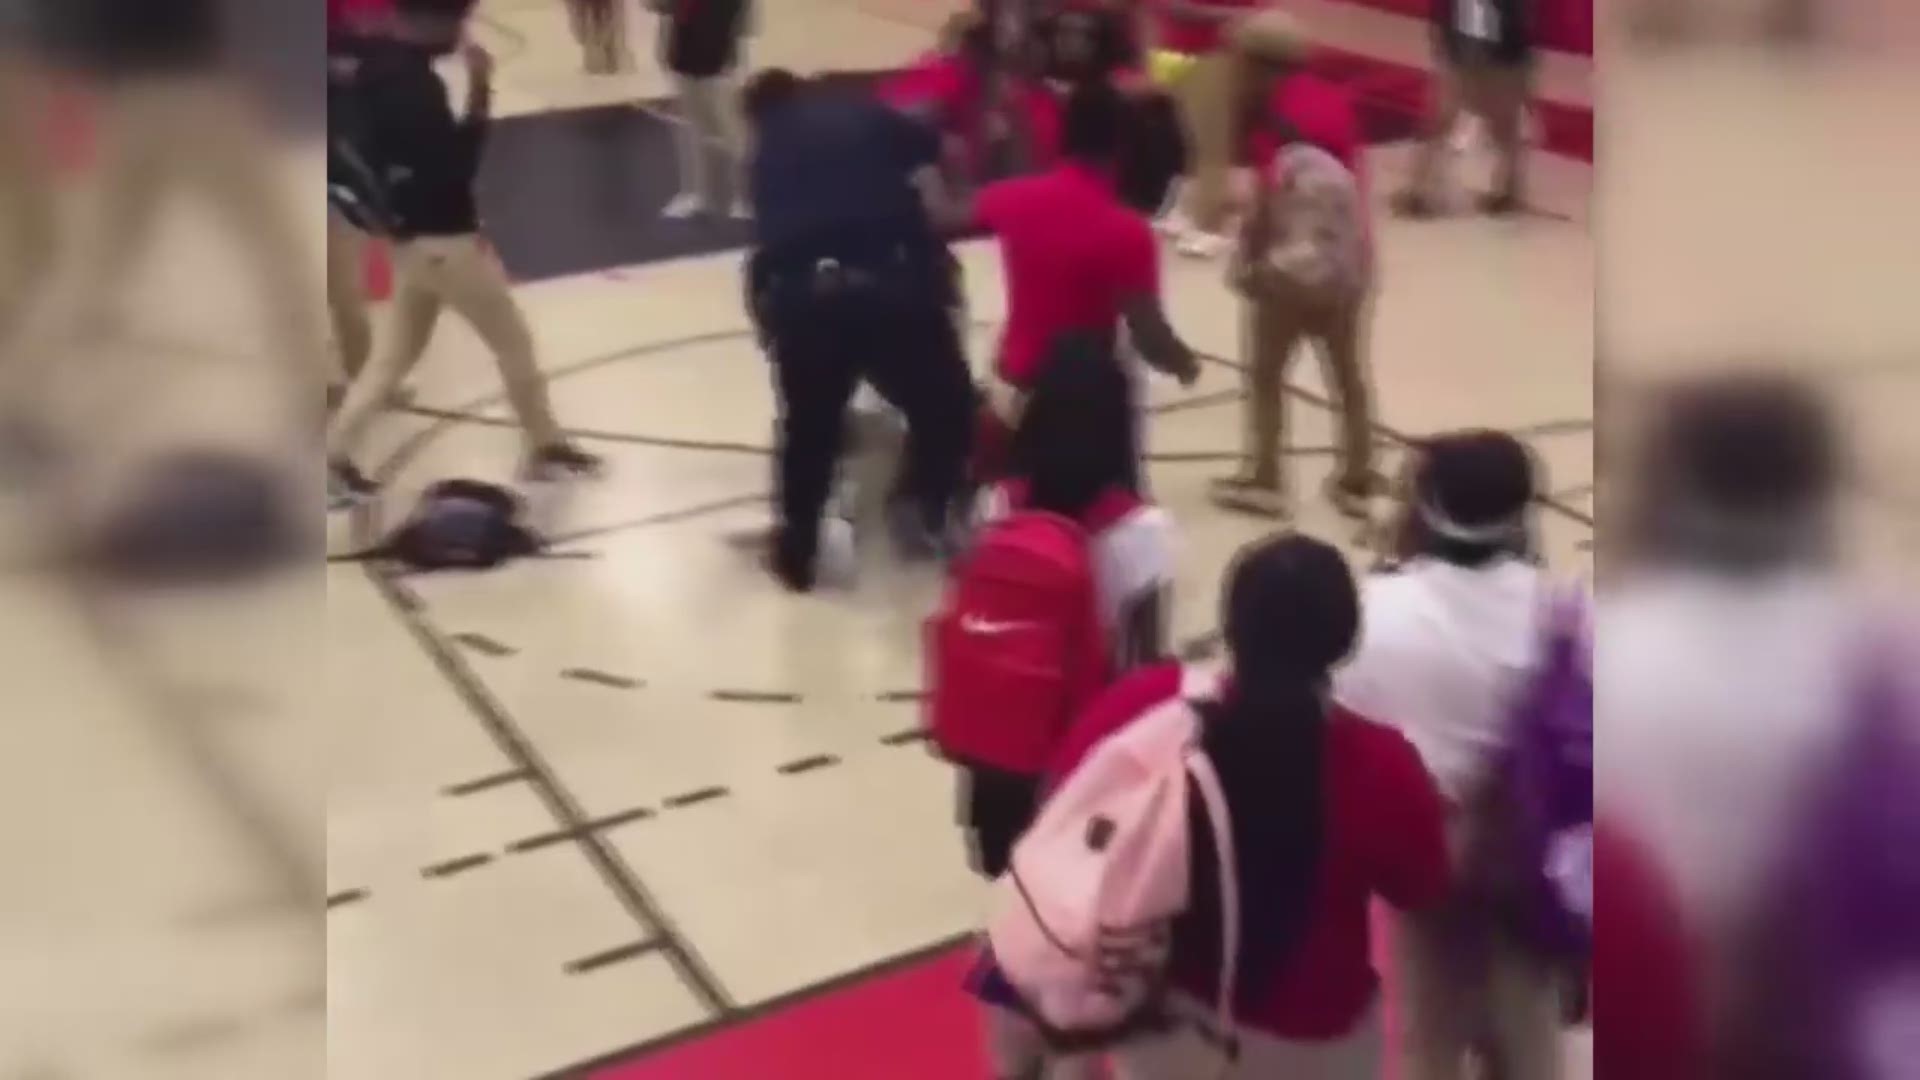 A school resource officer had to use a stun gun to to diffuse an out-of-control brawl at Baker High School Monday according to our partners at WBRZ